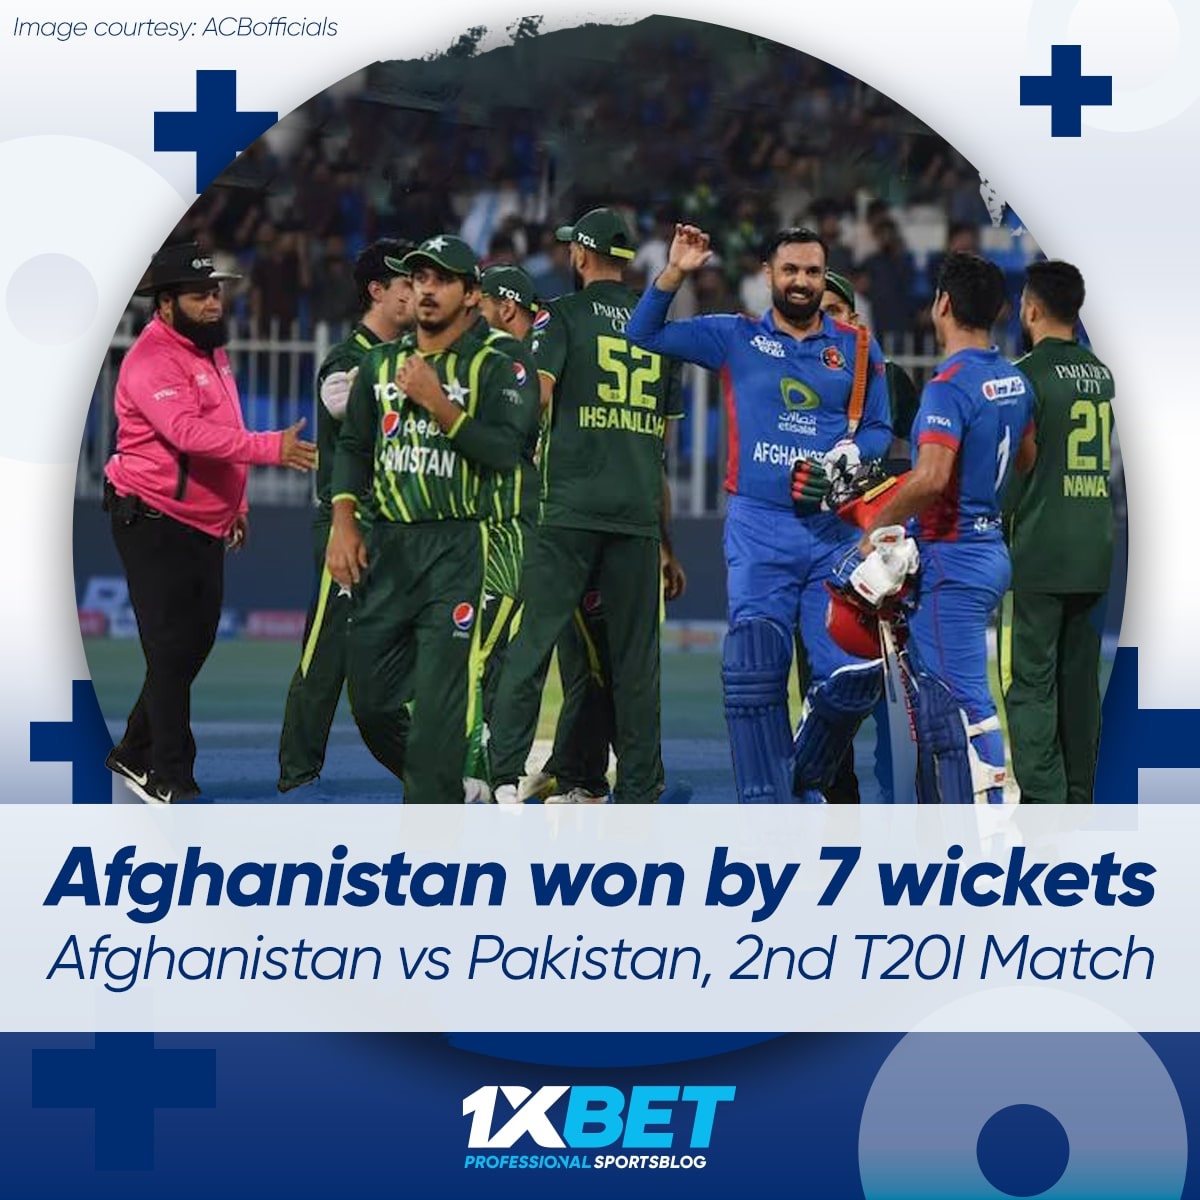 Afghanistan won by 7 wickets